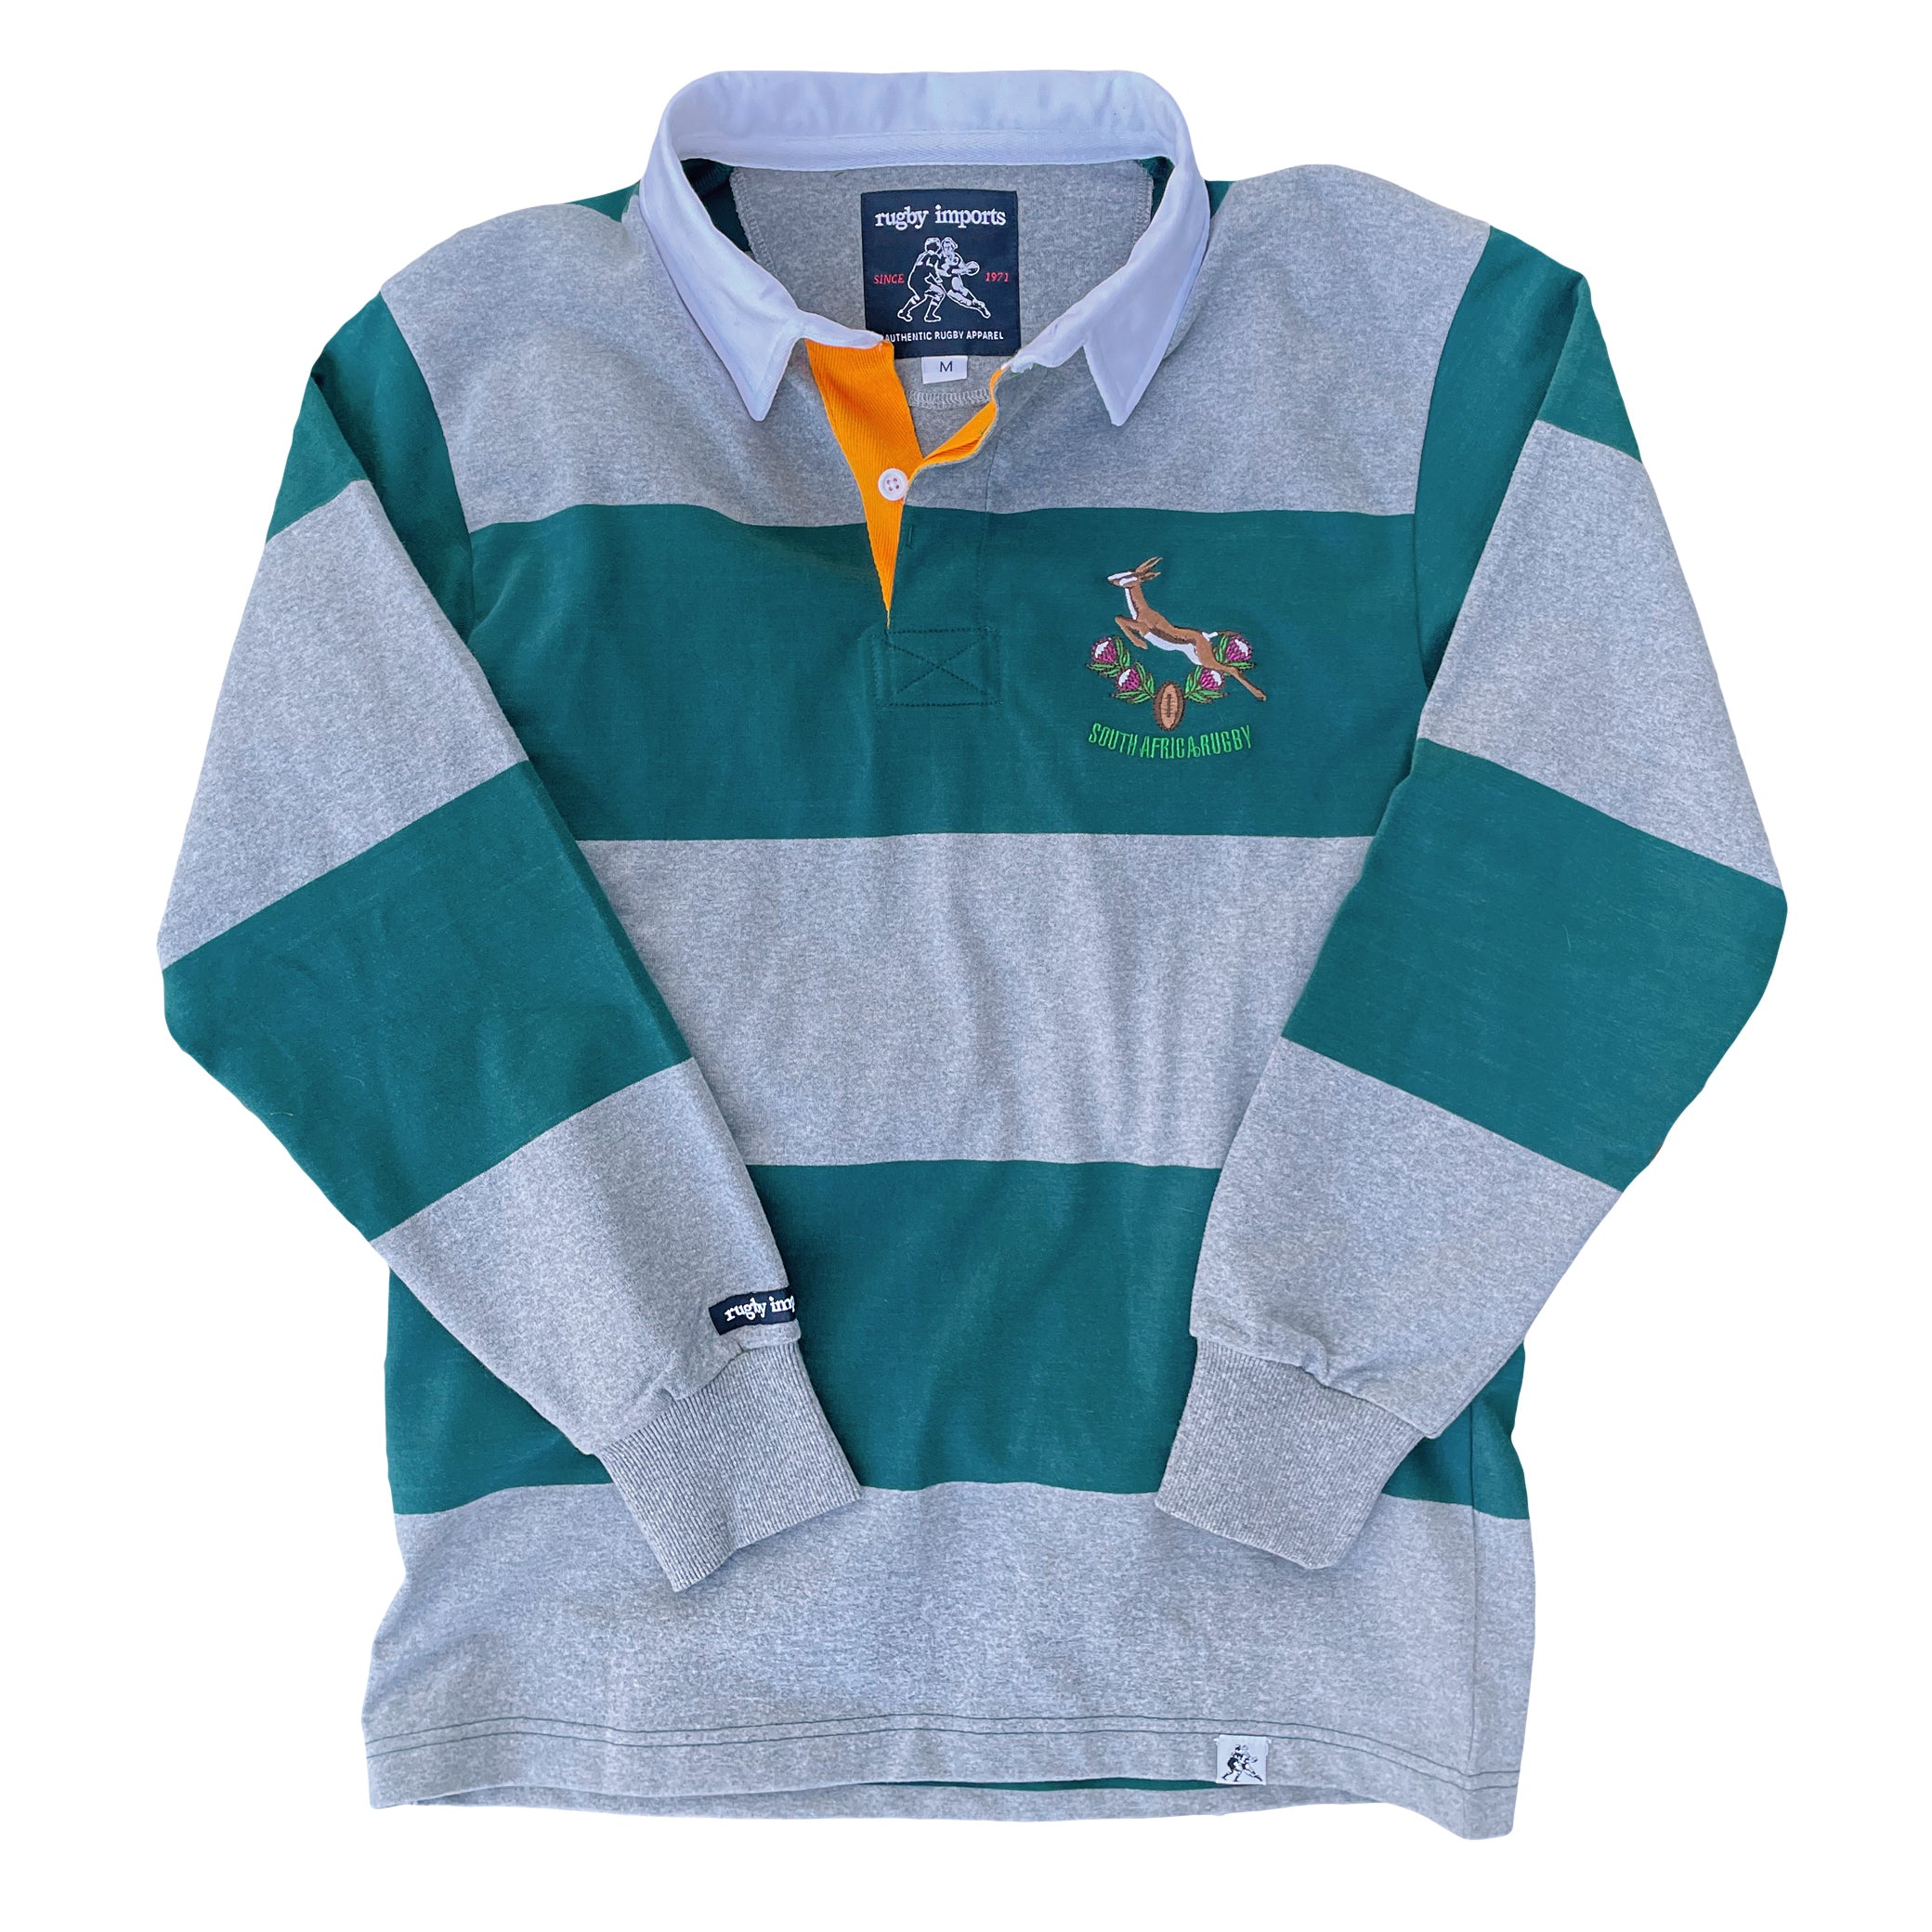 South Africa Grey Hoops Rugby Jersey